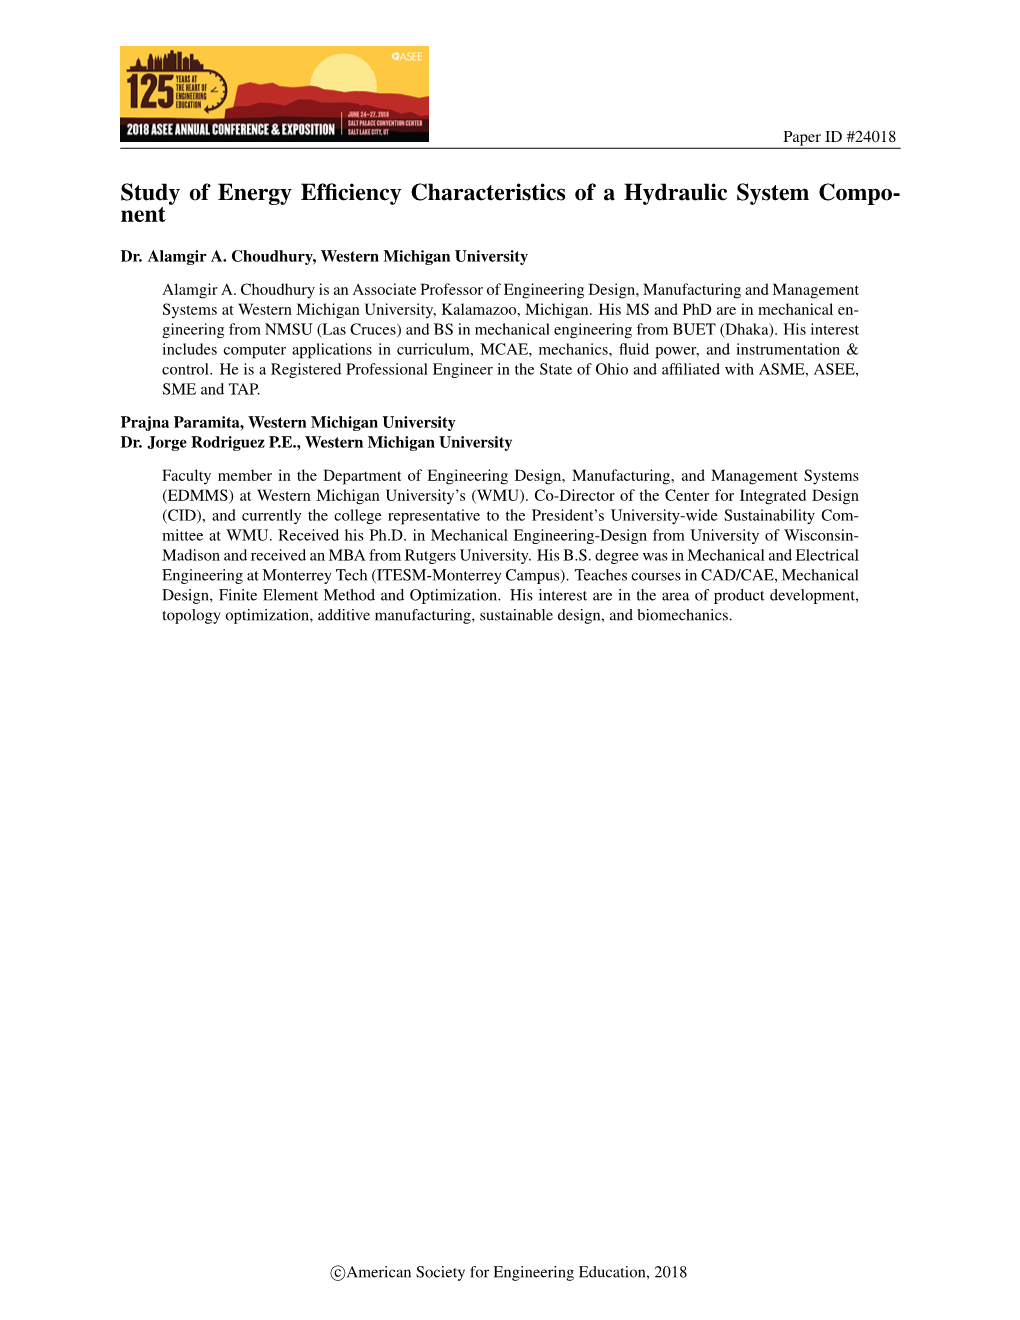 Study of Energy Efficiency Characteristics of a Hydraulic